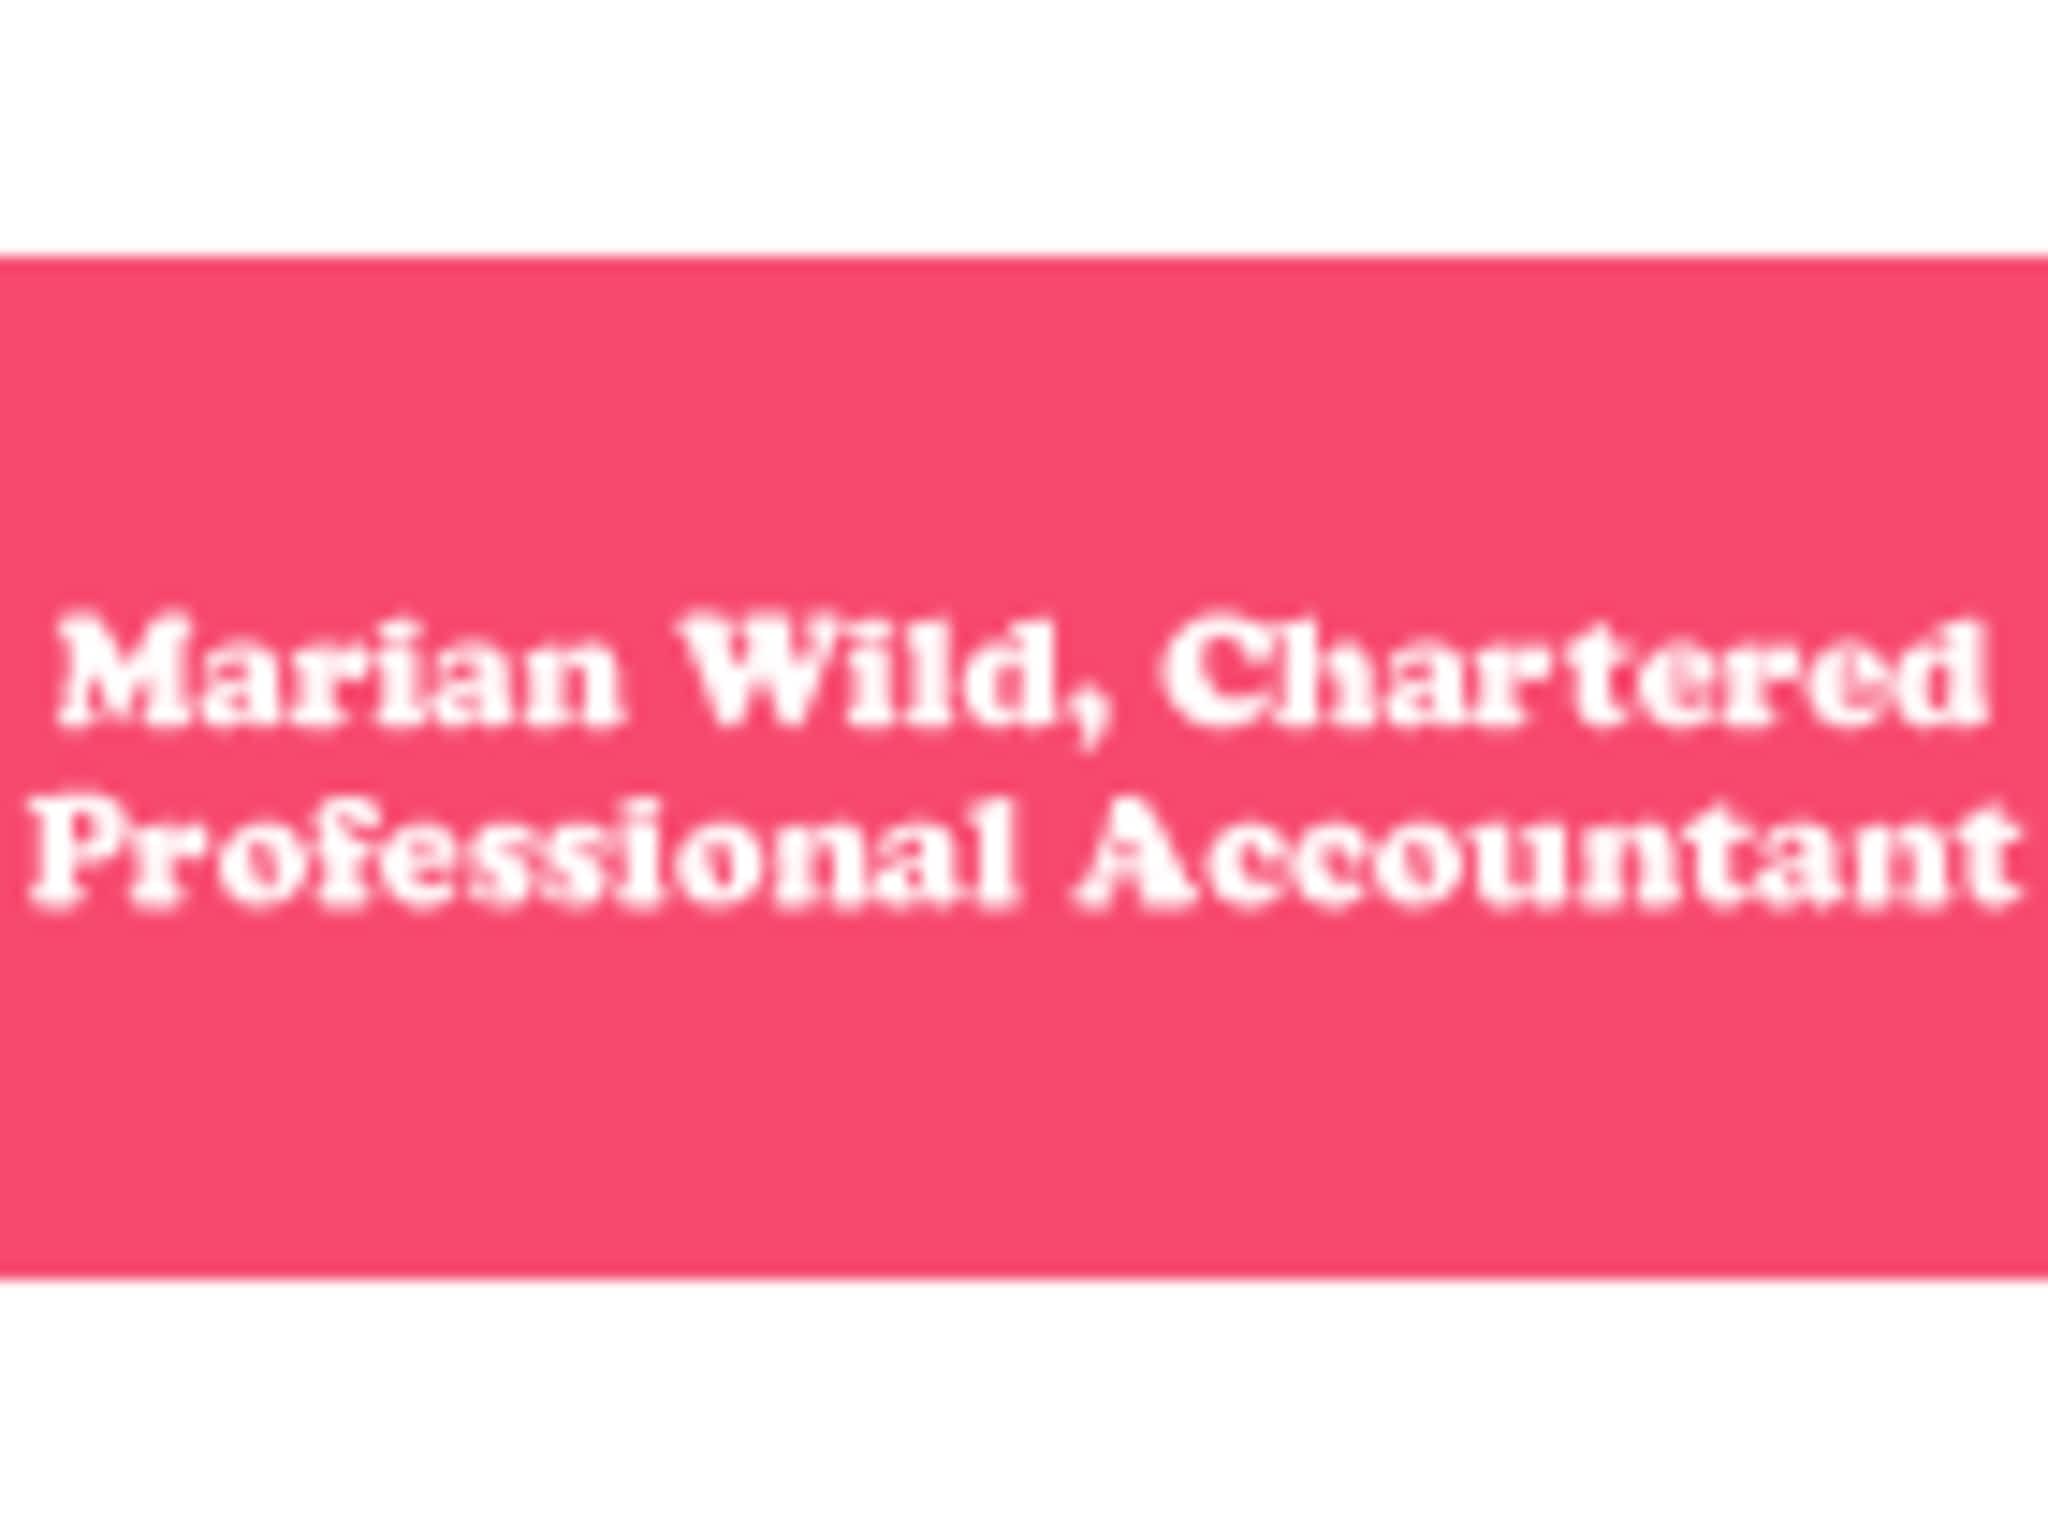 photo Marian Wild, Chartered Professional Accountant